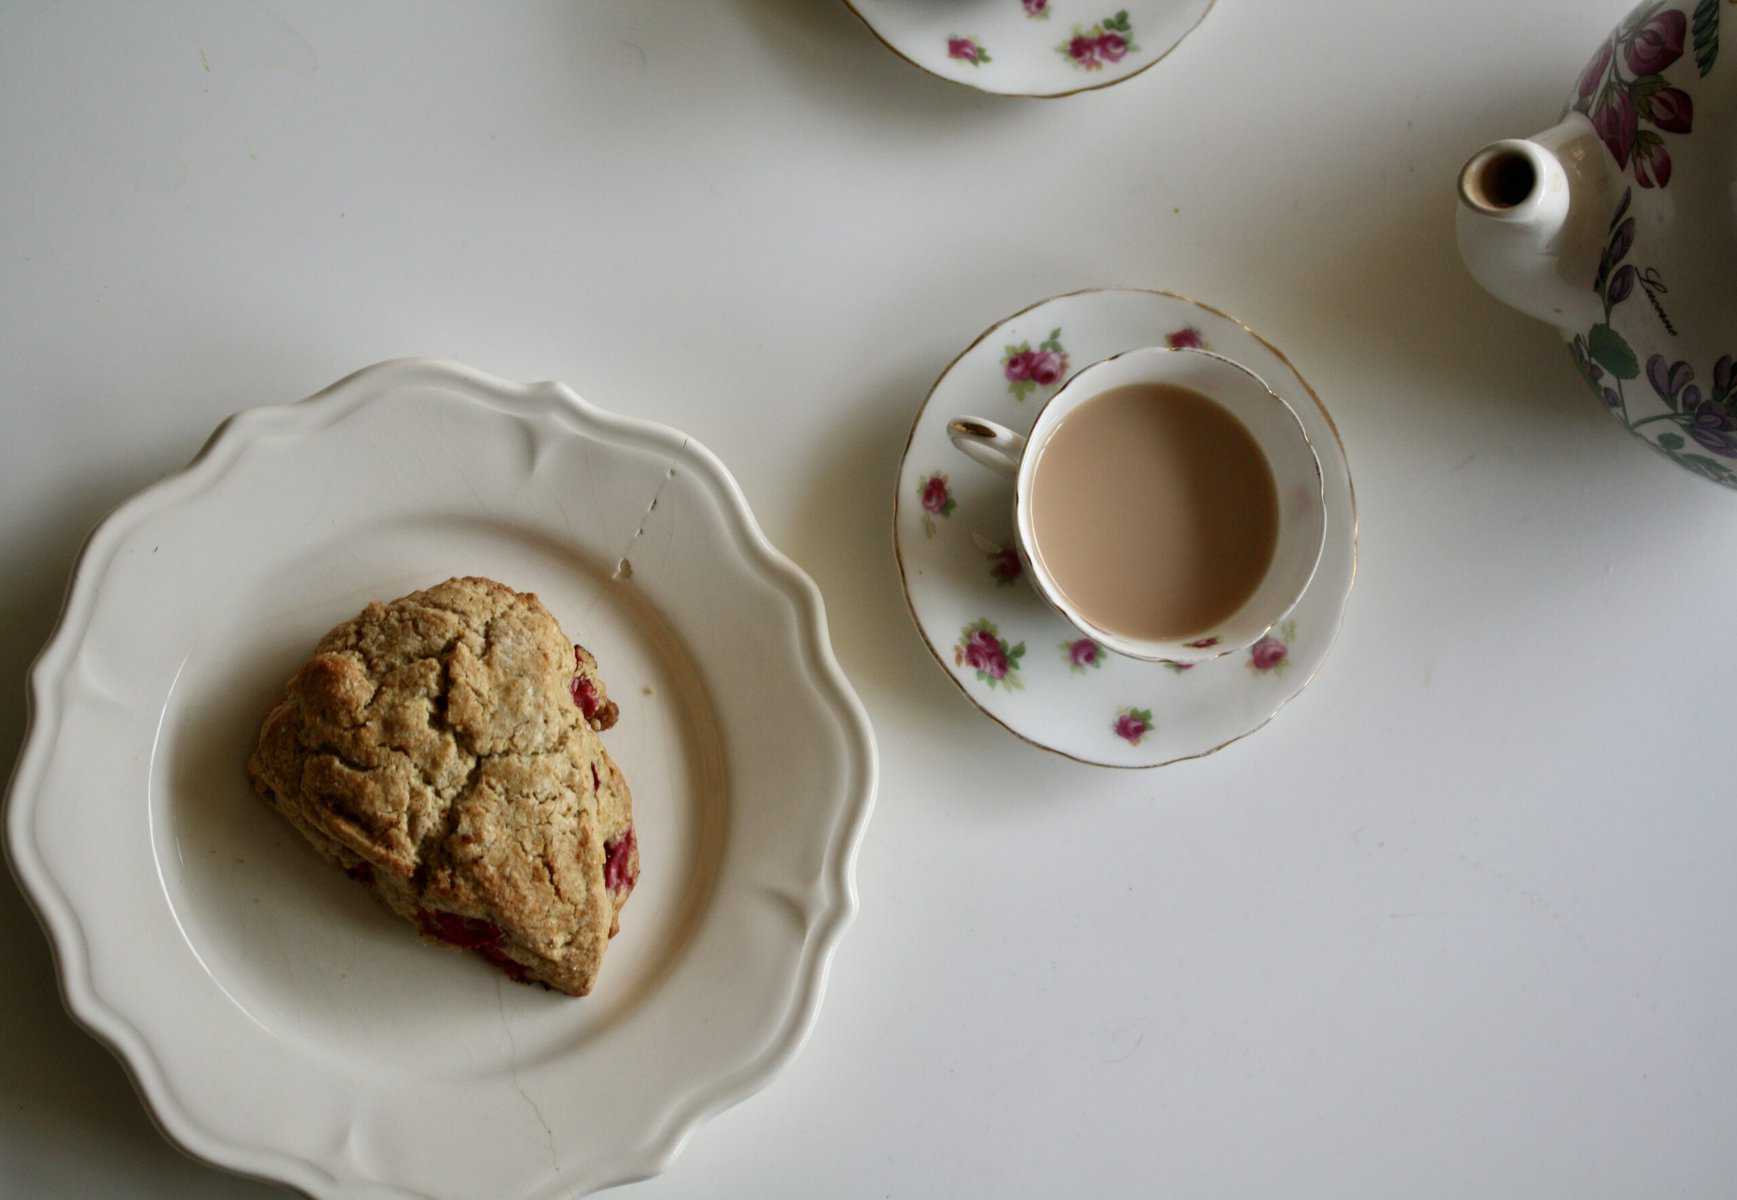 A cranberry scone on a plate, with a cup of tea to its right.